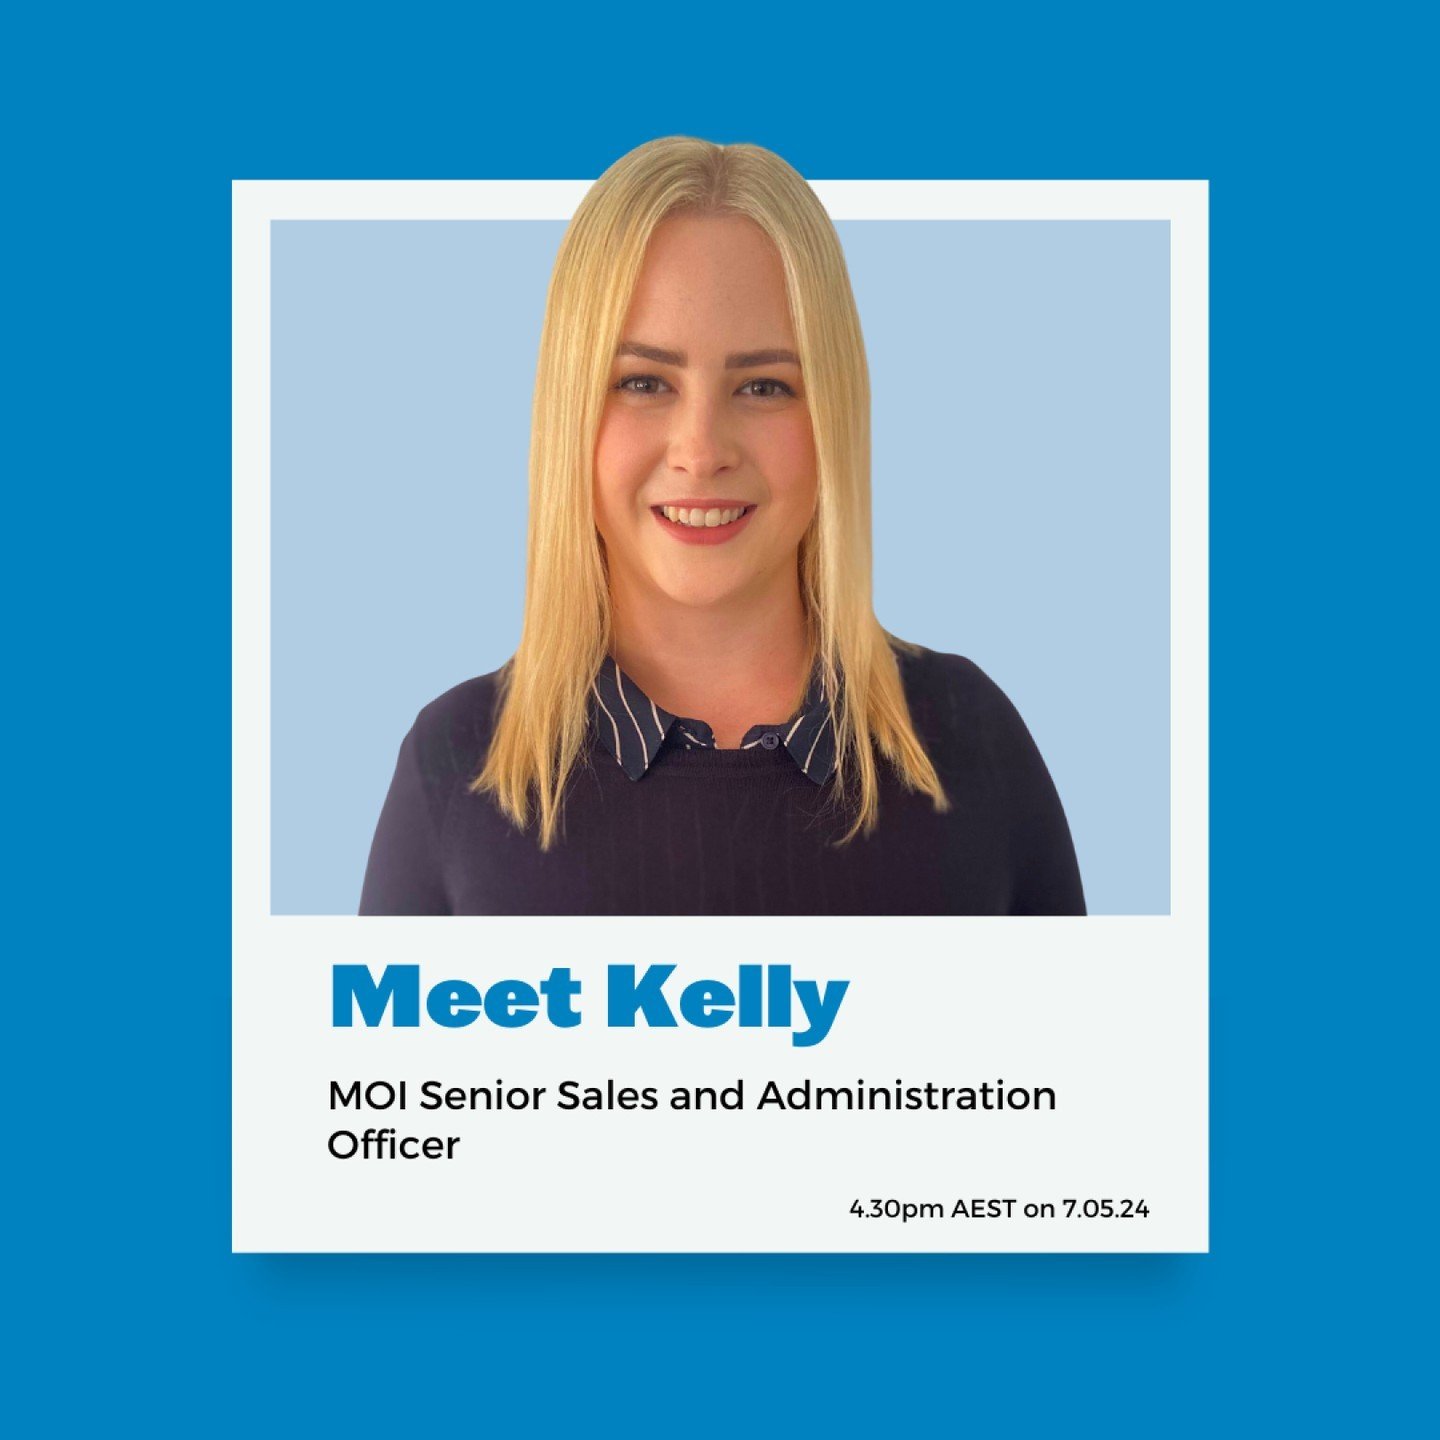 Meet our team! This is the wonderful Kelly and she takes care of order processing and pricing. When she's not in the MOI office, she loves to spoil her two cocker spaniels and enjoys brunch and a good book. Thank you for bringing such positive energy